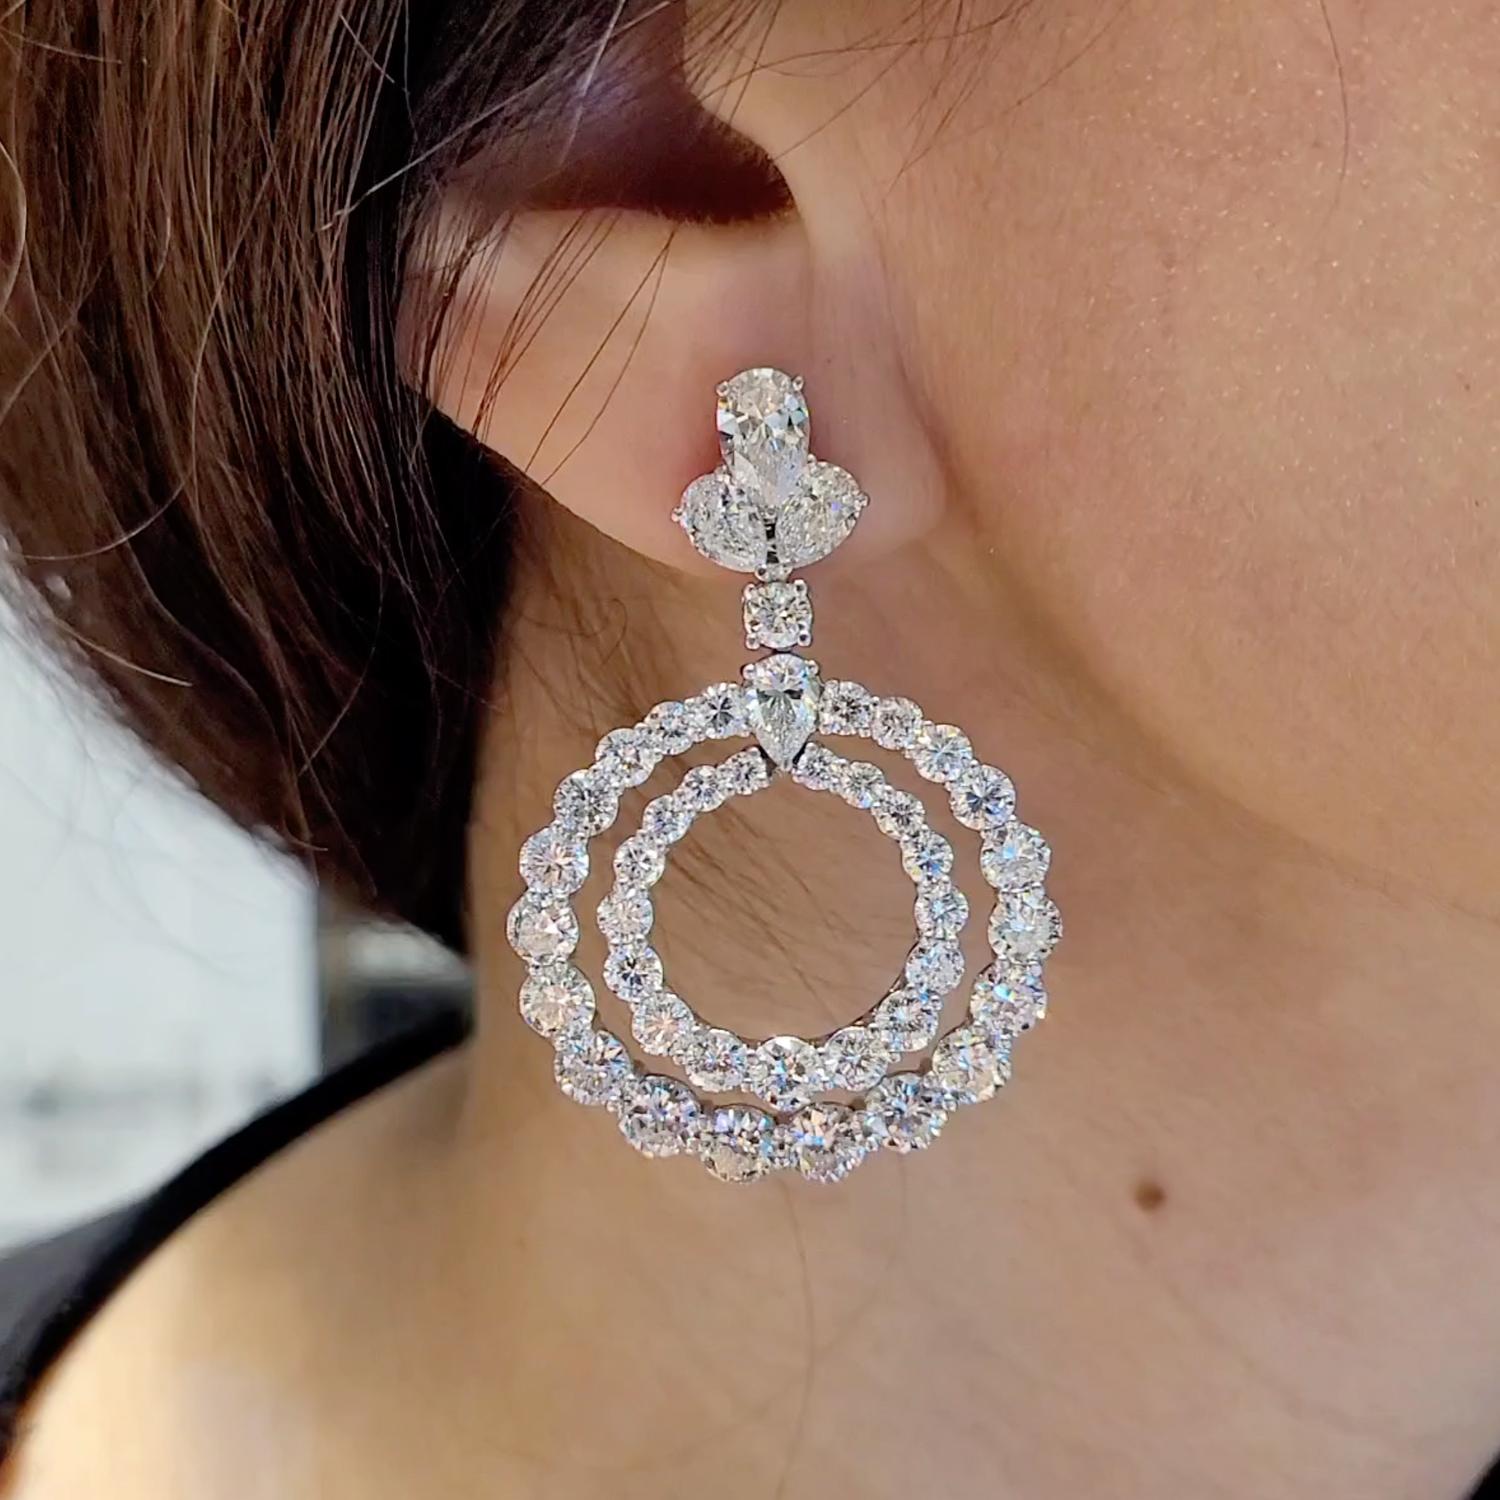 Introducing our exquisite Diamond Double Hoop Earrings, a testament to timeless elegance and unparalleled luxury. Crafted with precision and adorned with a dazzling array of 84 Round and Pear shape Diamonds, these earrings are a radiant celebration